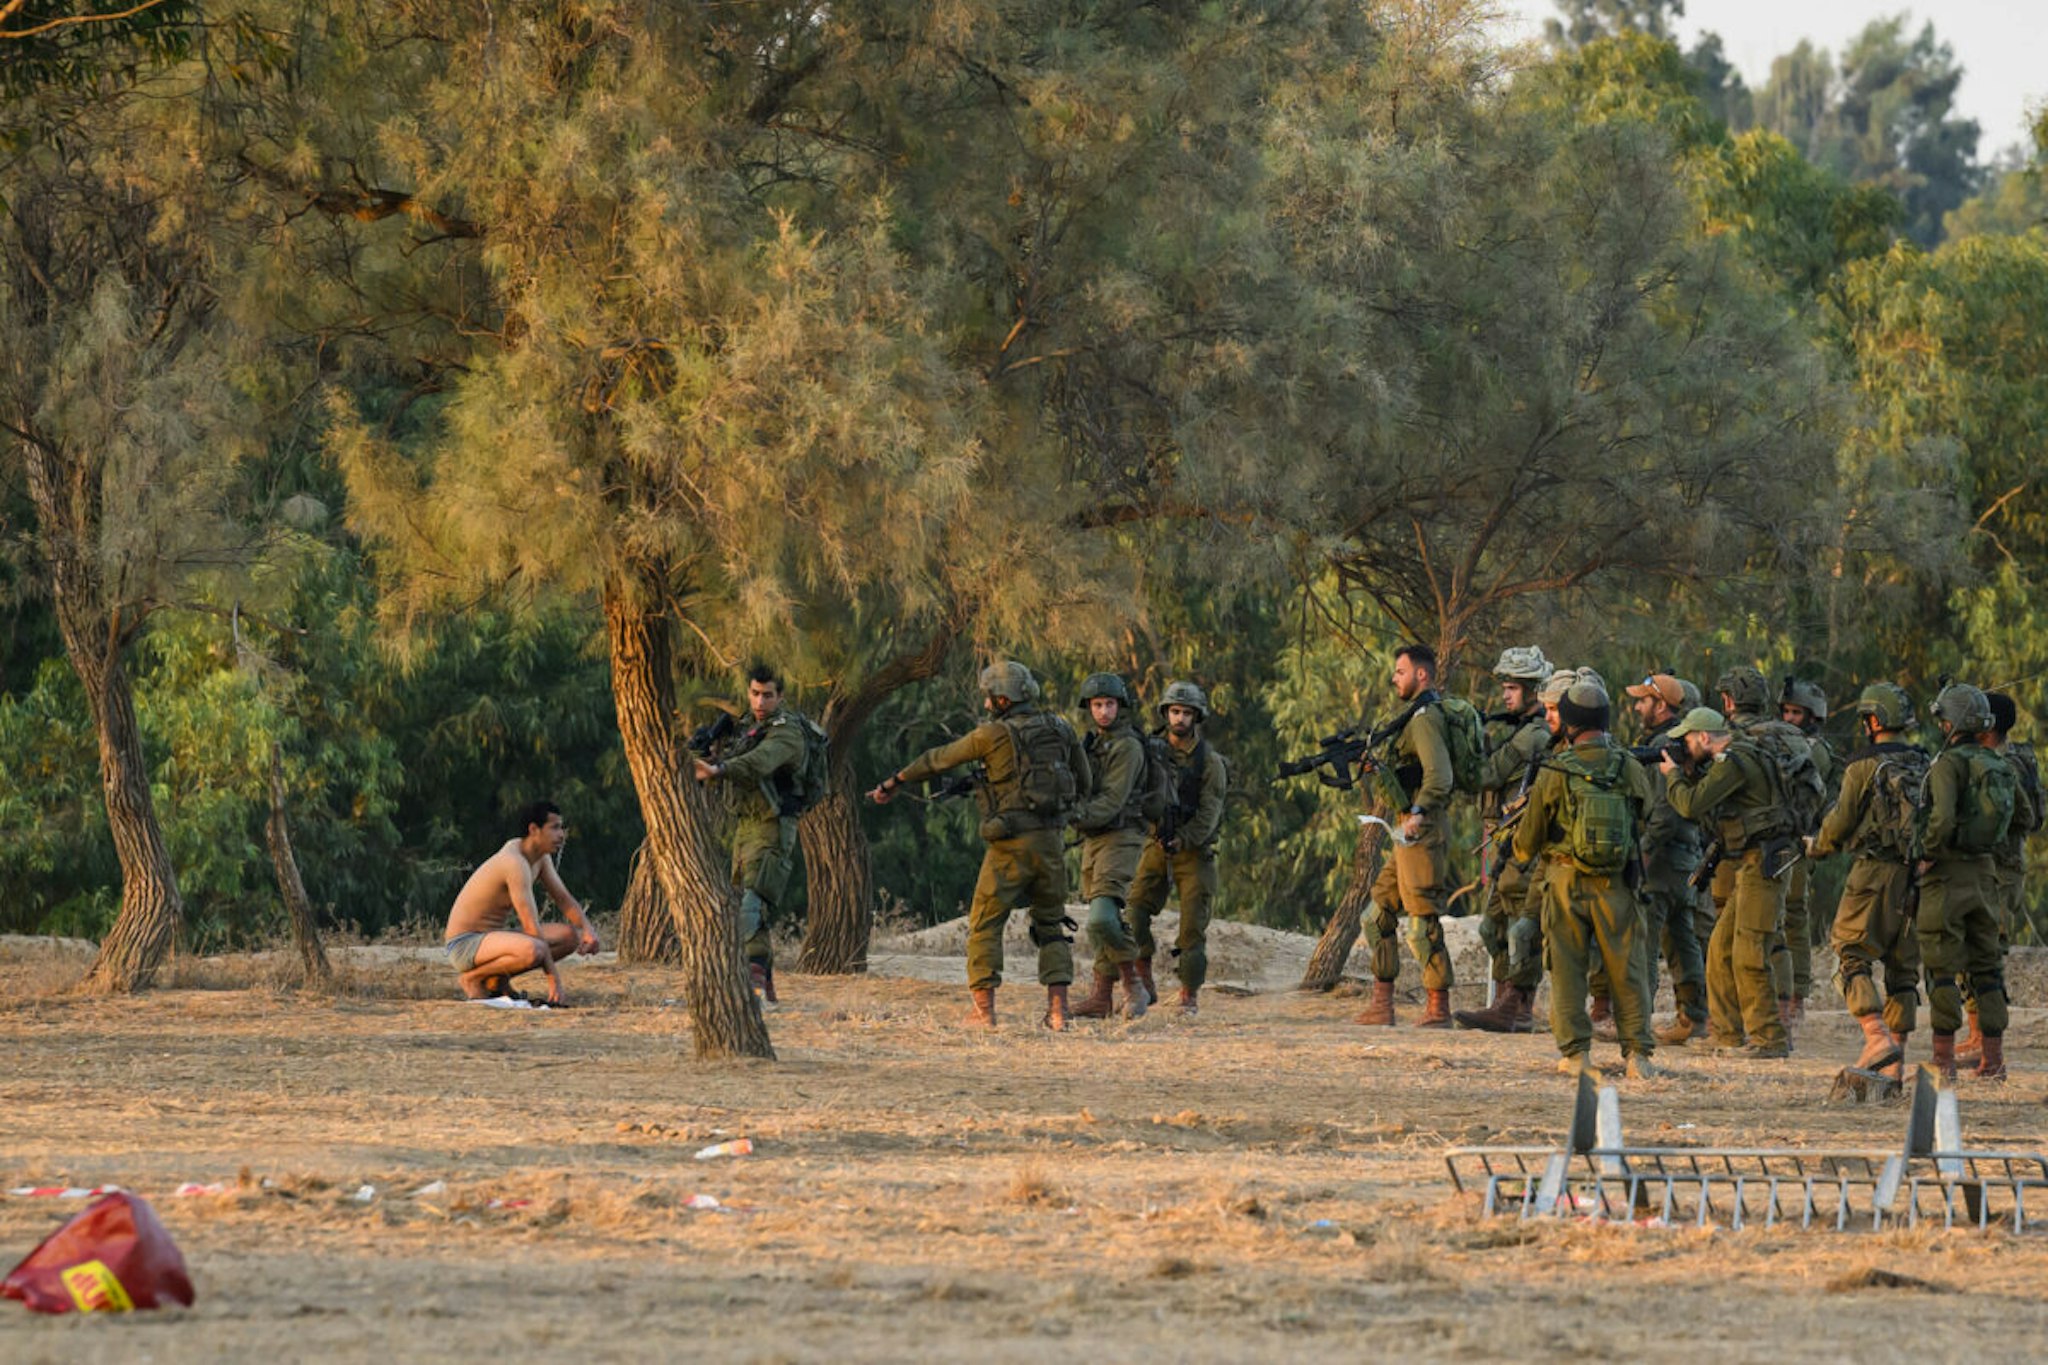 A man is ordered to undress before being arrested by members of the security forces following an incident at the Supernova Music Festival site, five days after hundreds were killed and dozens taken by Hamas militants, near the border with Gaza on October 12, 2023 in Kibbutz Re'im, Israel.